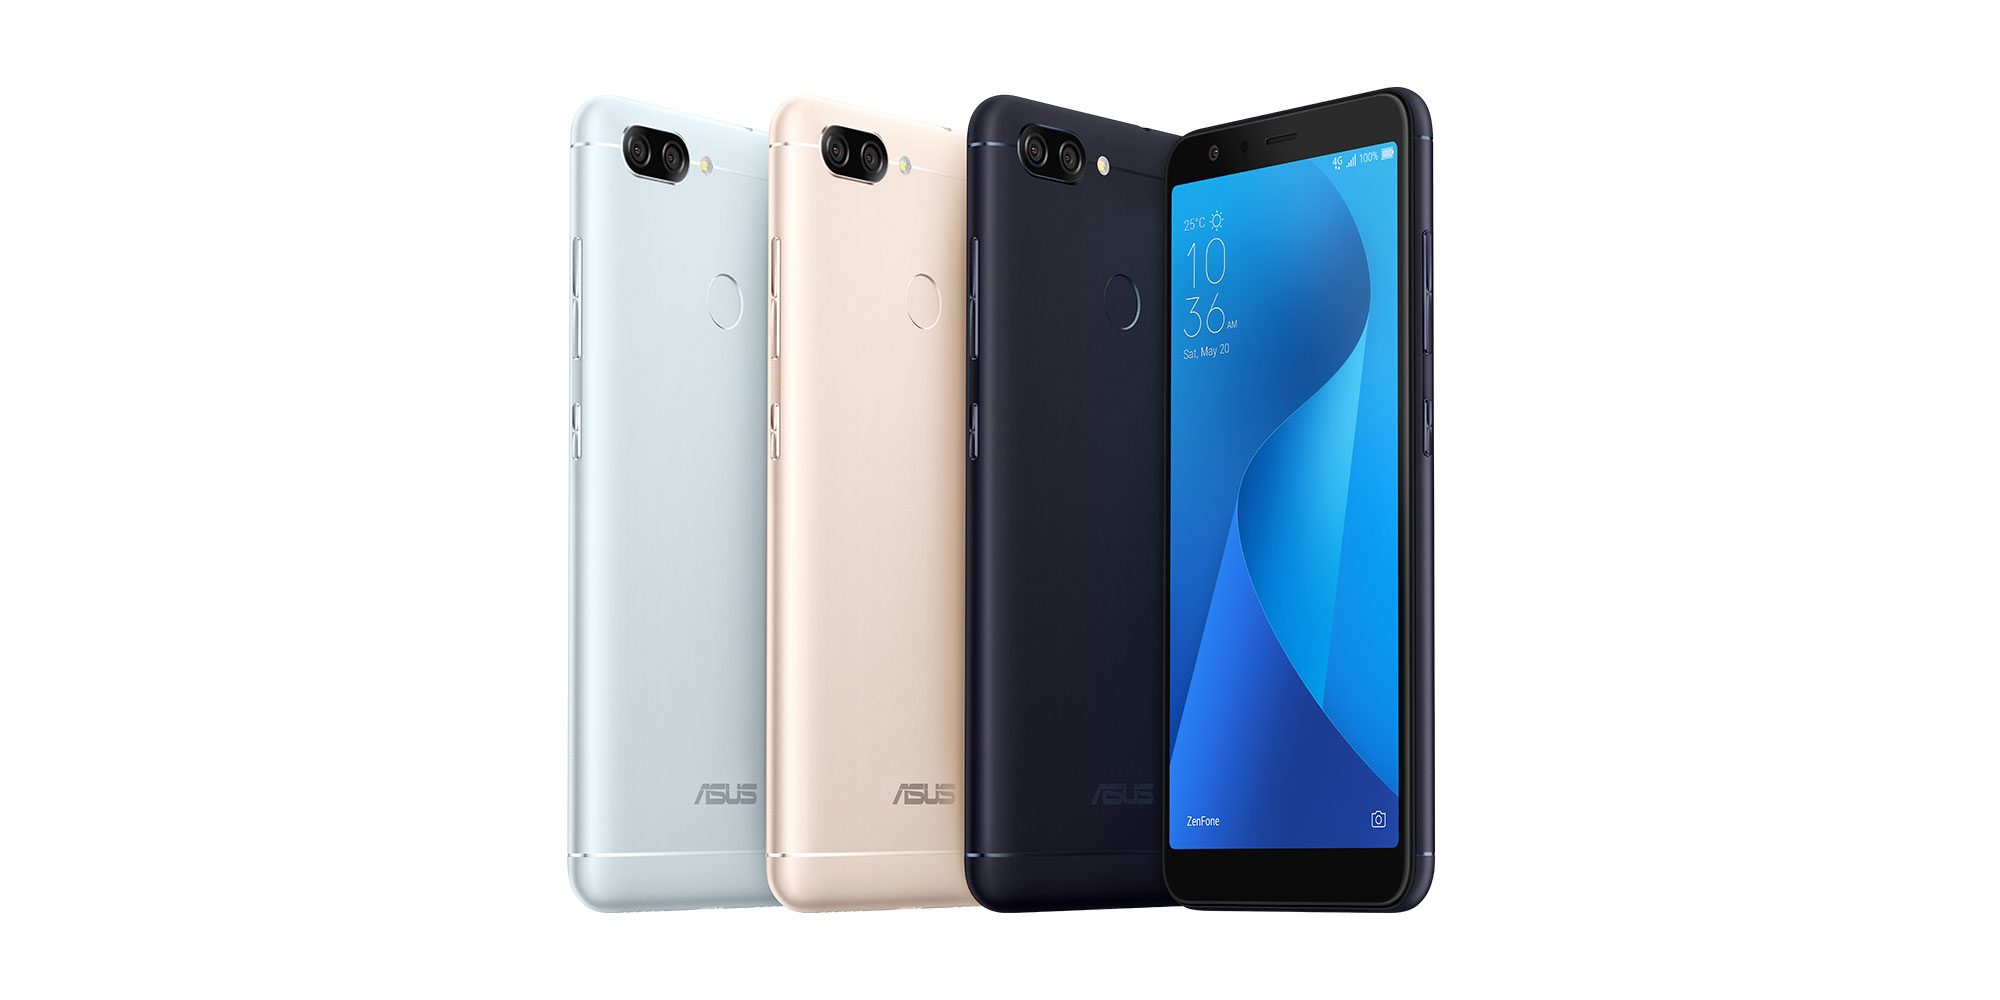 How to Root Asus Zenfone Max Plus with Magisk without TWRP